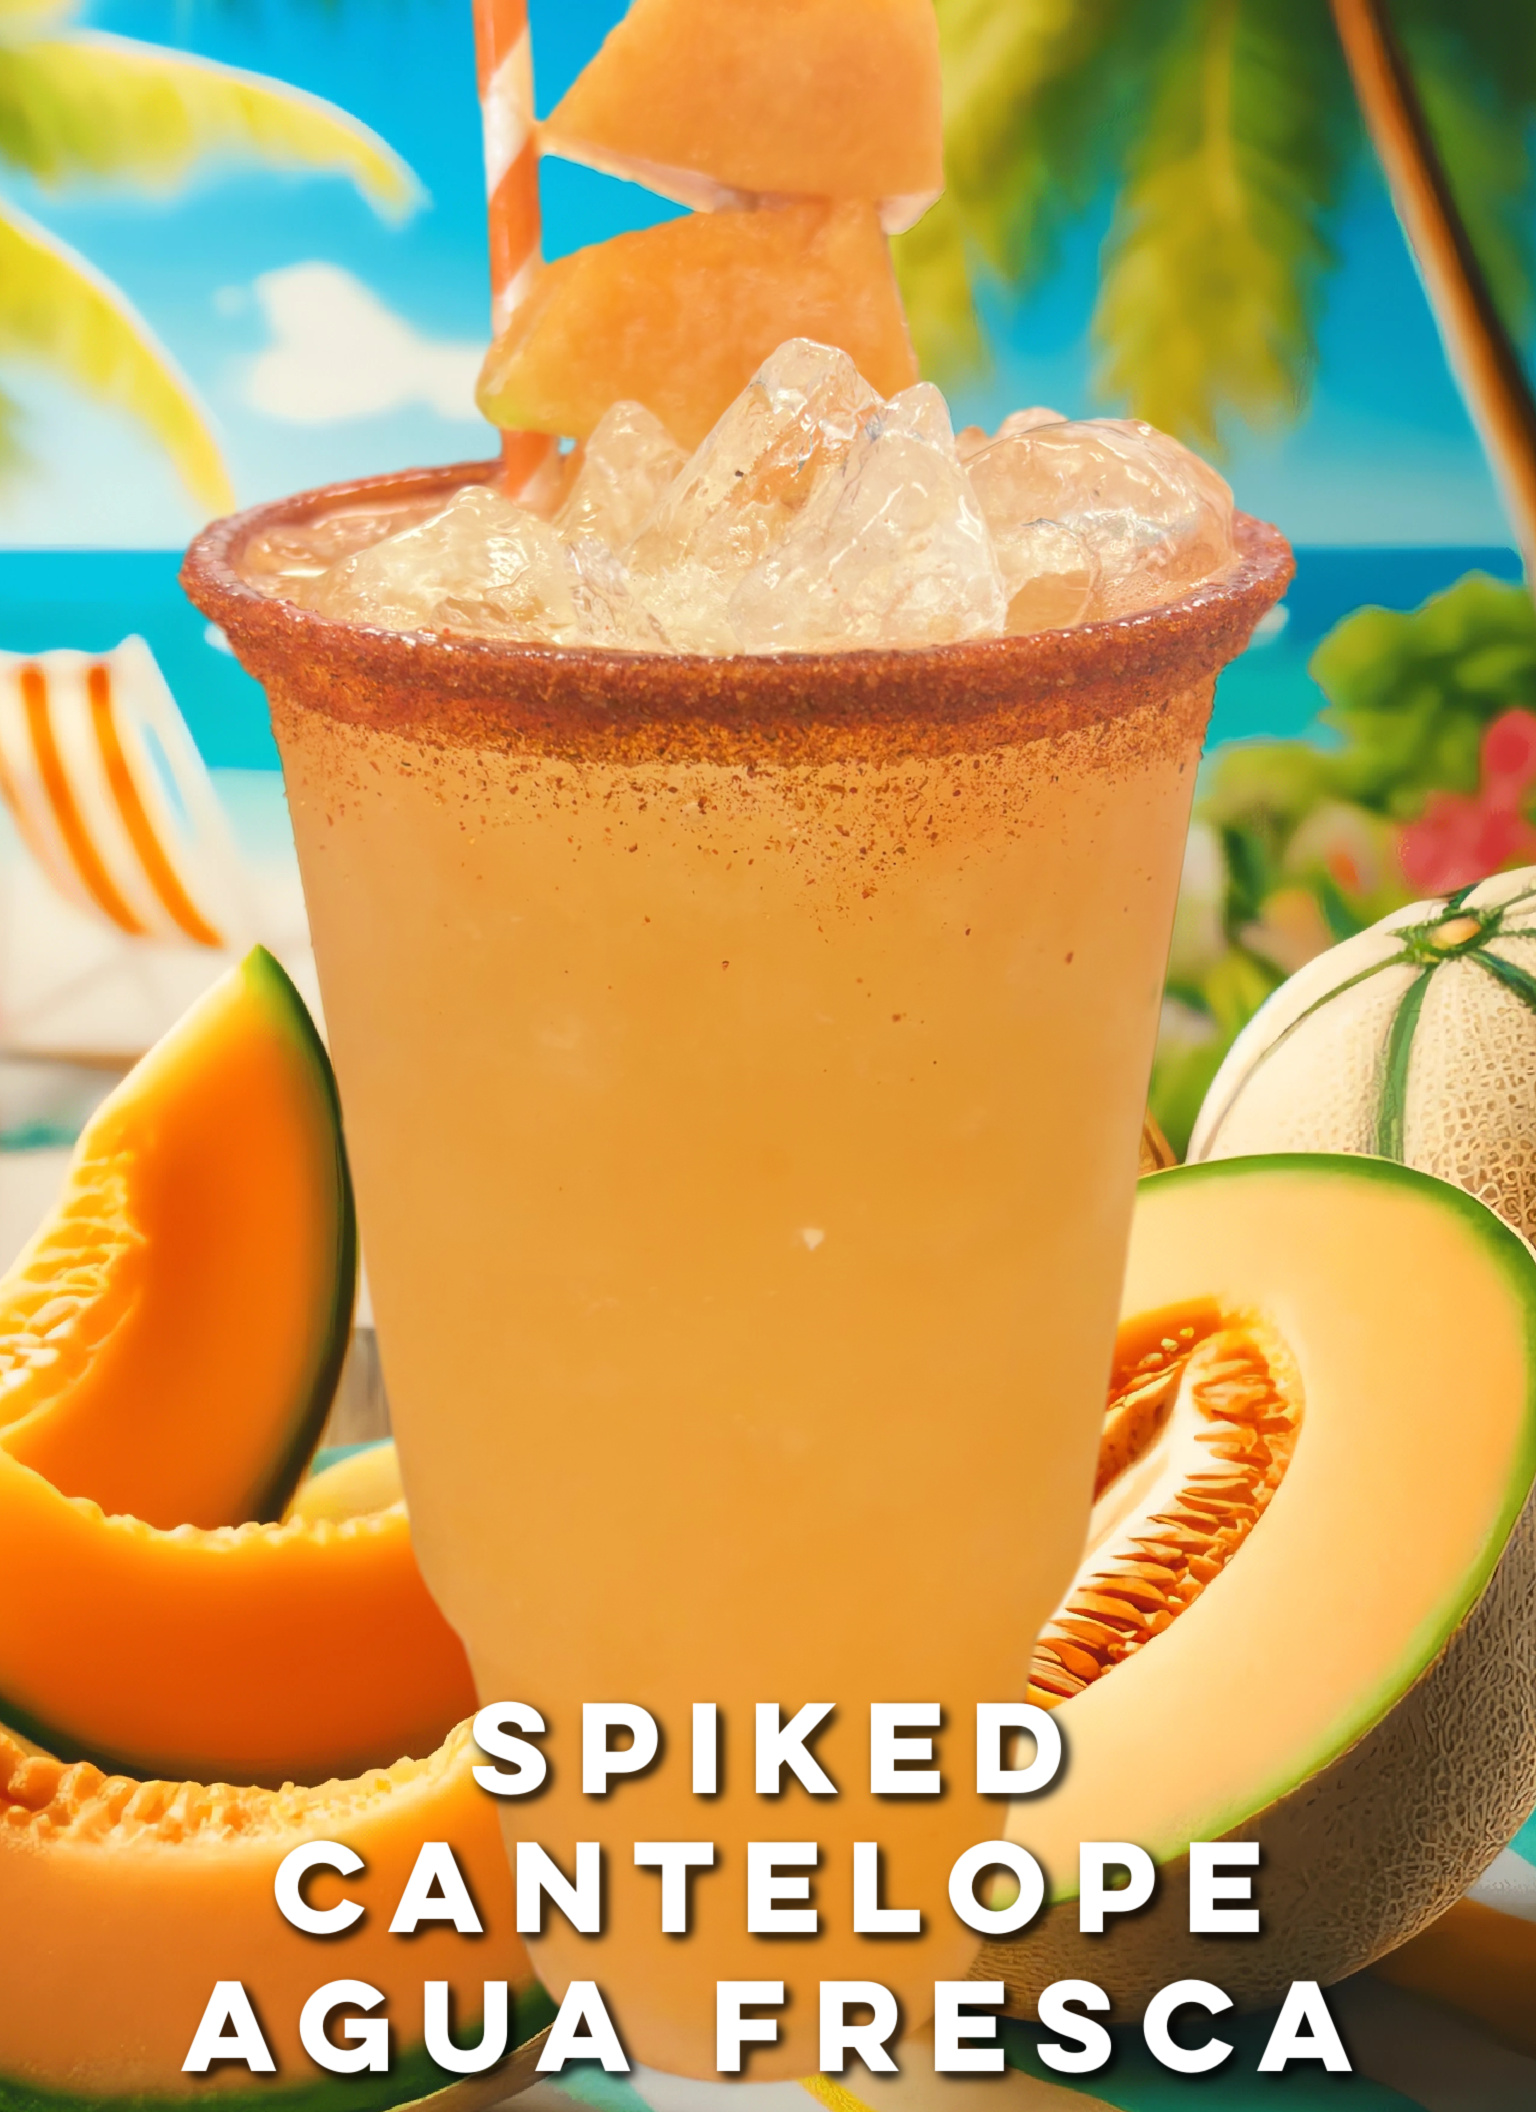 Spiked Cantelope Agua Fresca